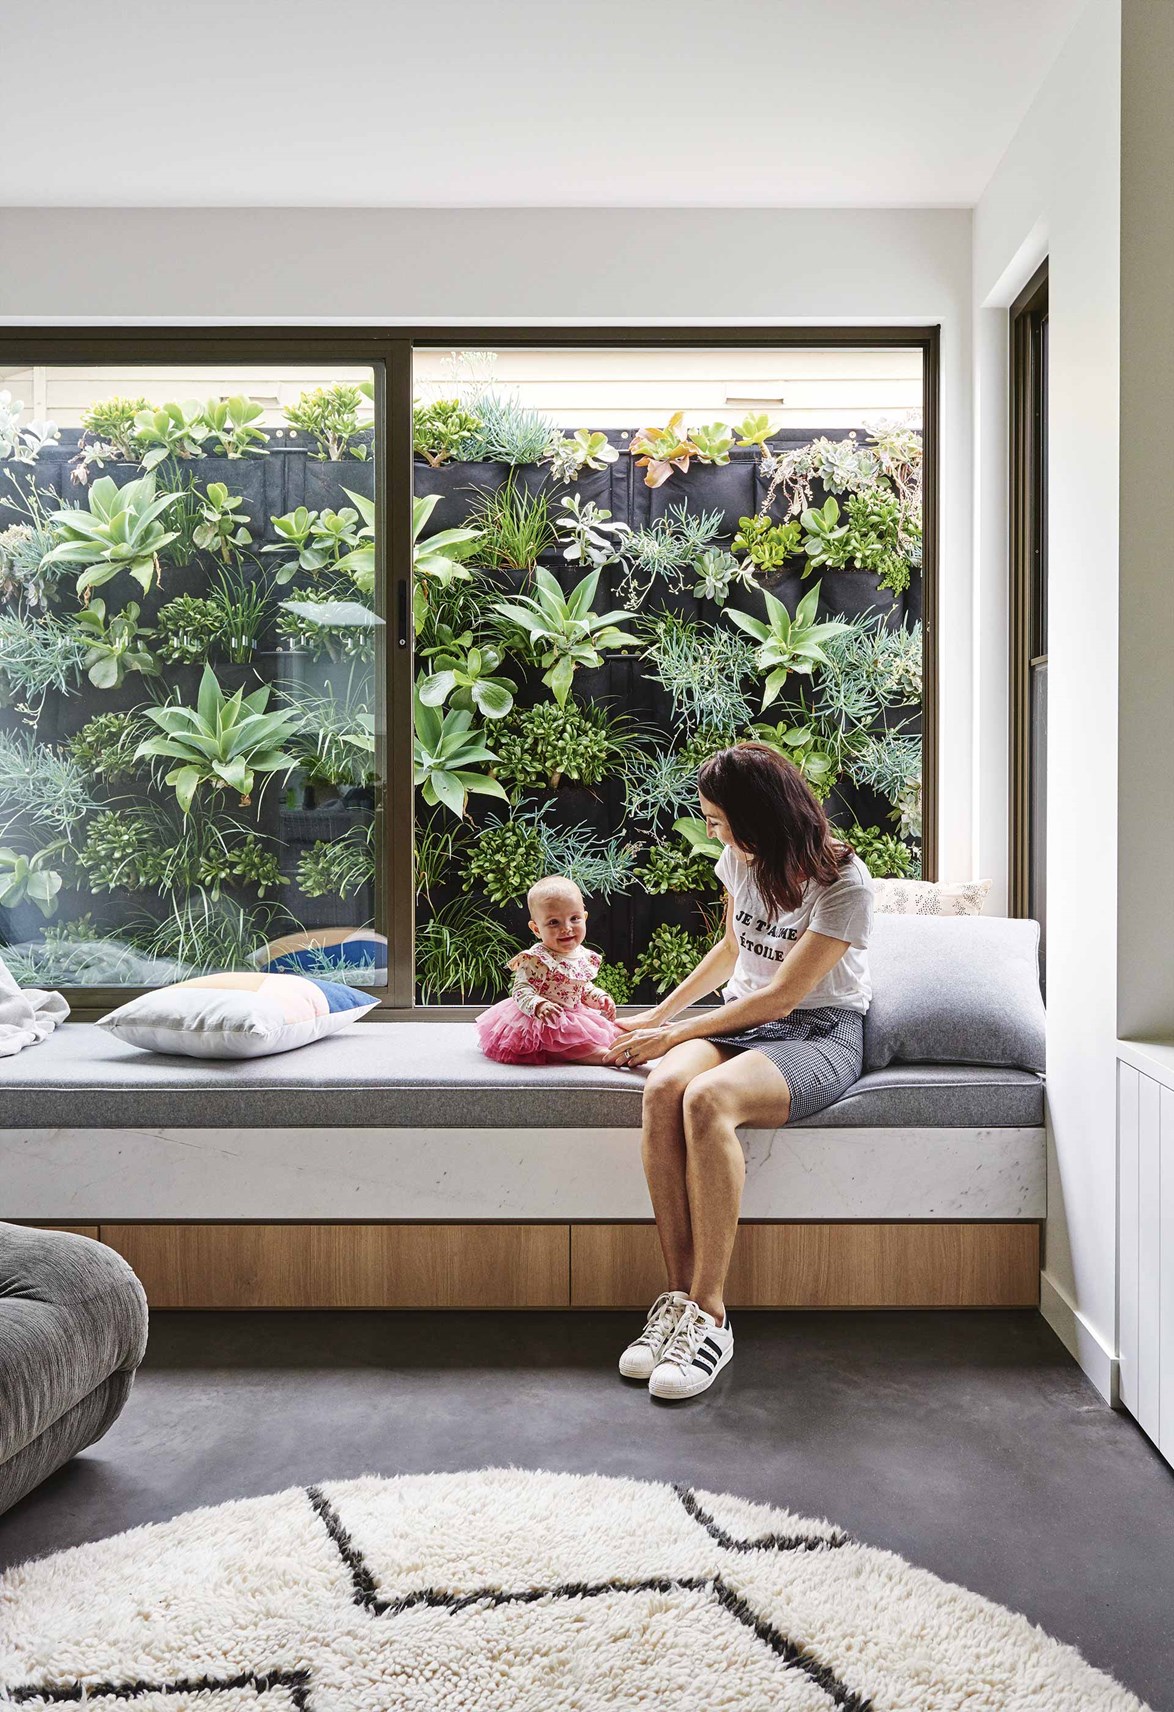 If there's scope to incorporate a window seat into your design but no view to speak of, create your own lush outlook, as seen in the vertical garden outside the living room of this contemporary Geelong home. "It gives the room personality," says architect Ben Robertson of [Tecture](http://www.tecture.com.au/|target="_blank"|rel="nofollow").